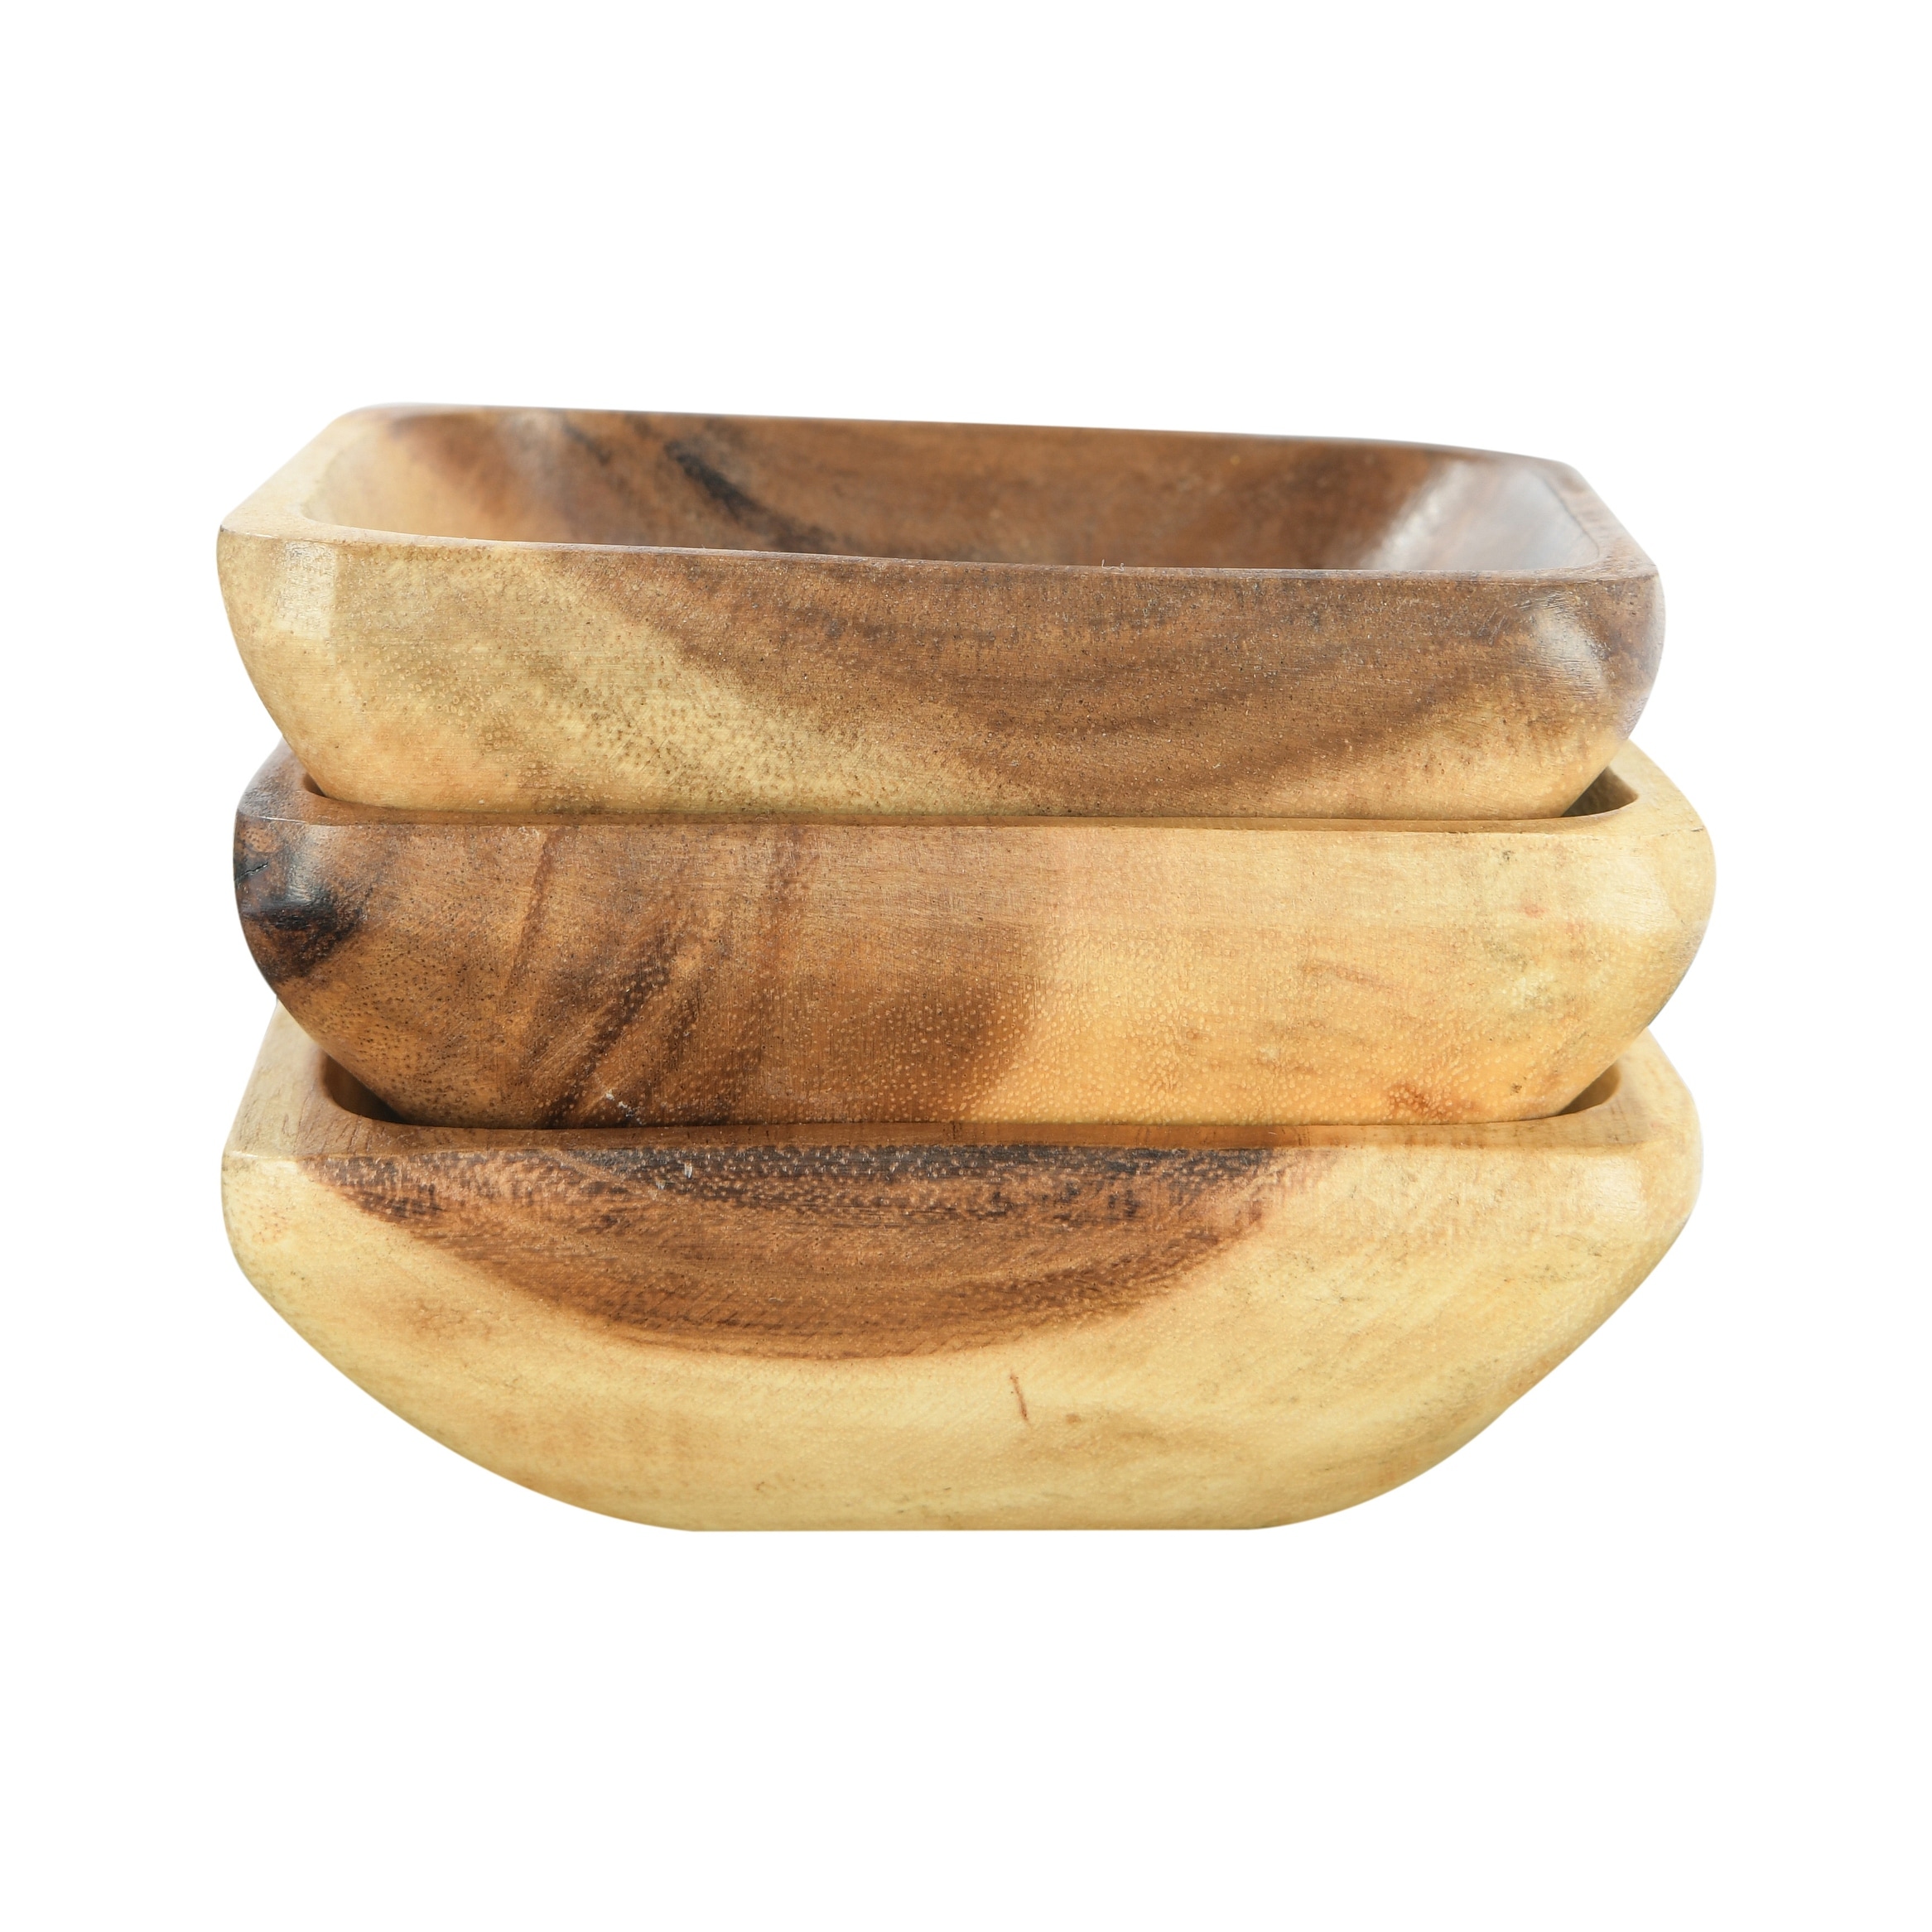 https://ak1.ostkcdn.com/images/products/is/images/direct/2379c736e27135376339c3e2b7504c4329567921/Square-Acacia-Wood-Bowls-%28Set-of-3-Pieces%29.jpg